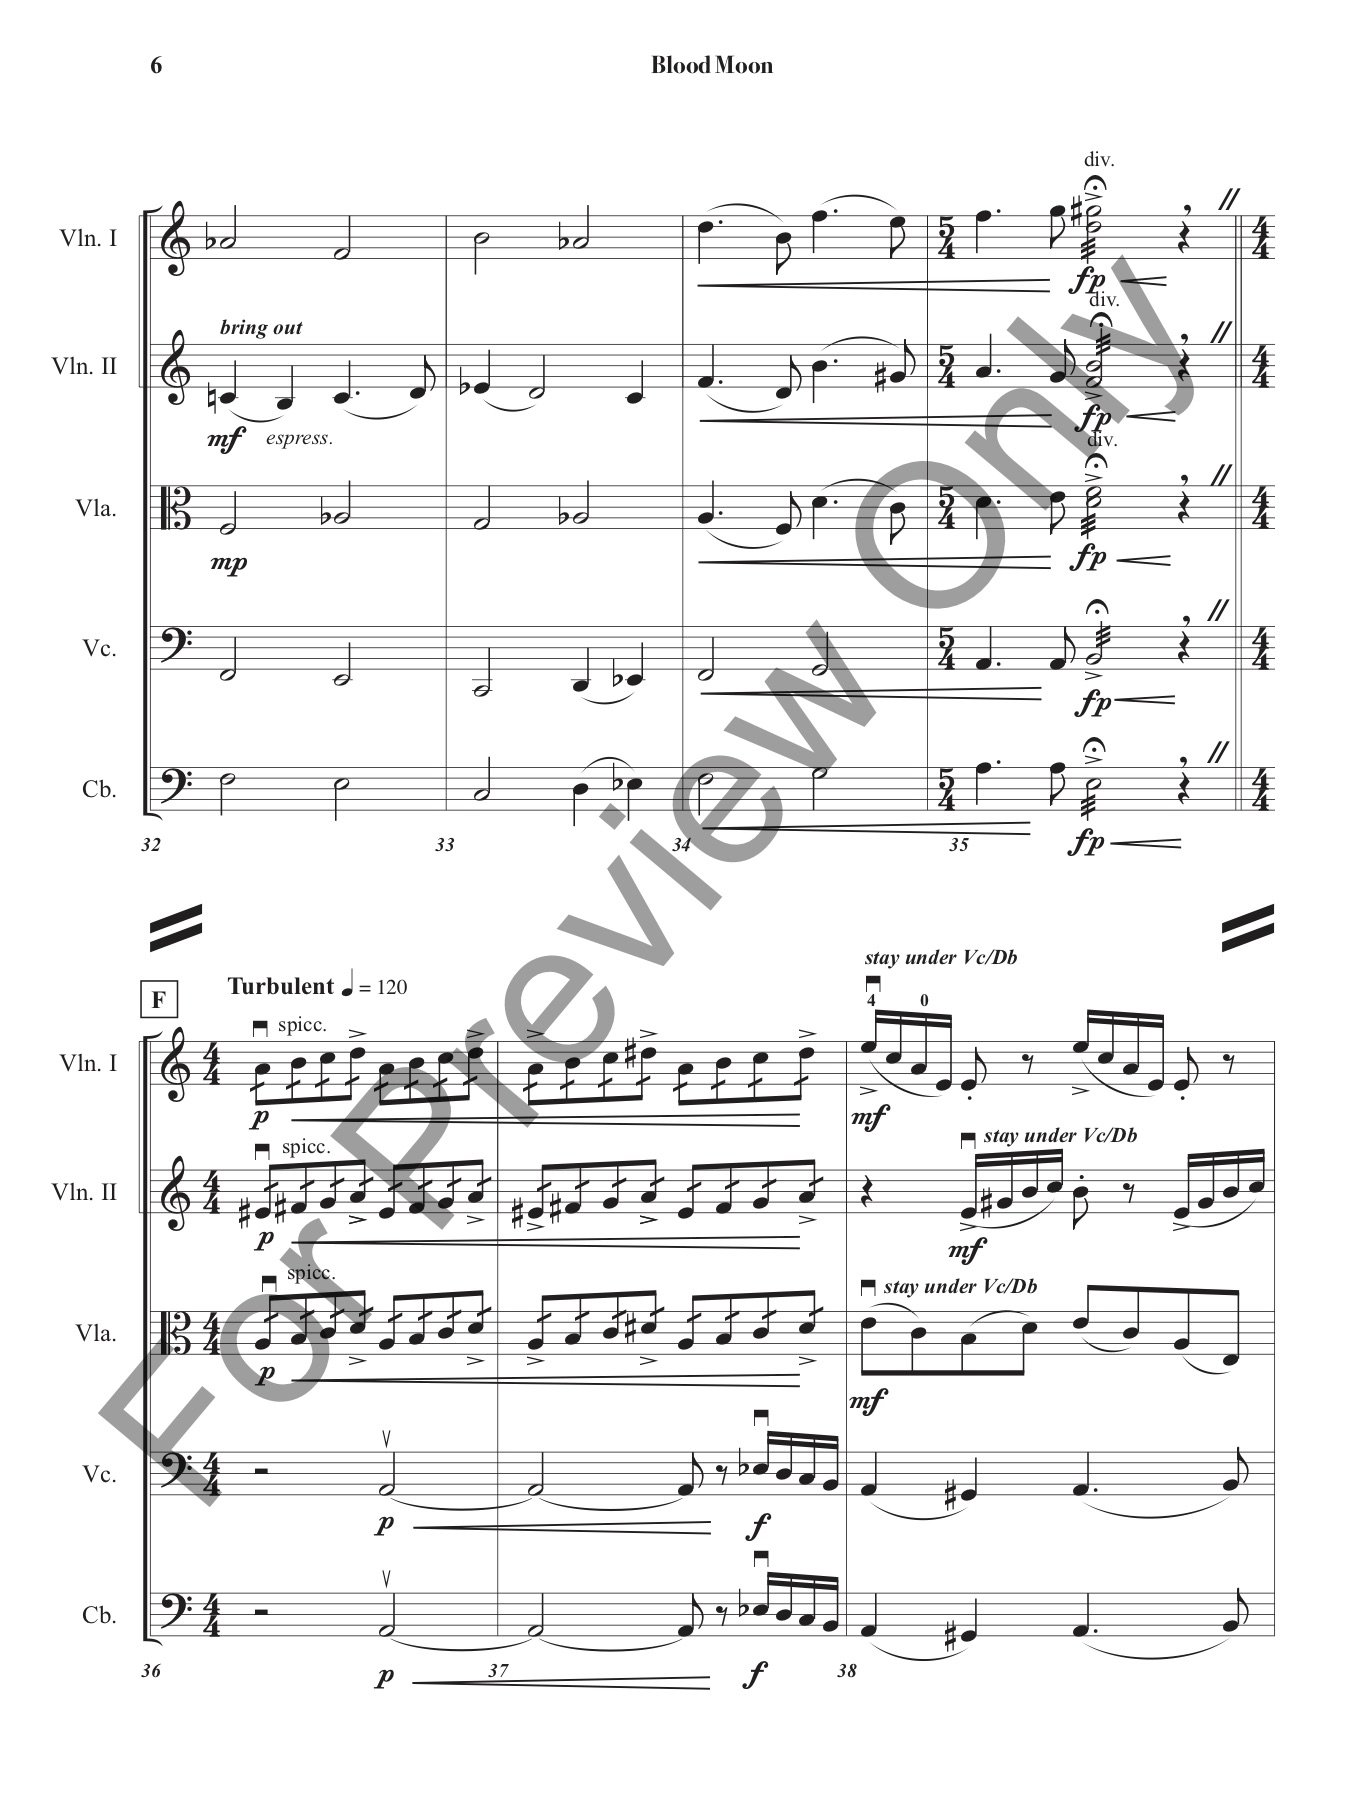 Blood Moon for String Orchestra - Cover Page and Full Score Only (for Preview Only p8).jpg